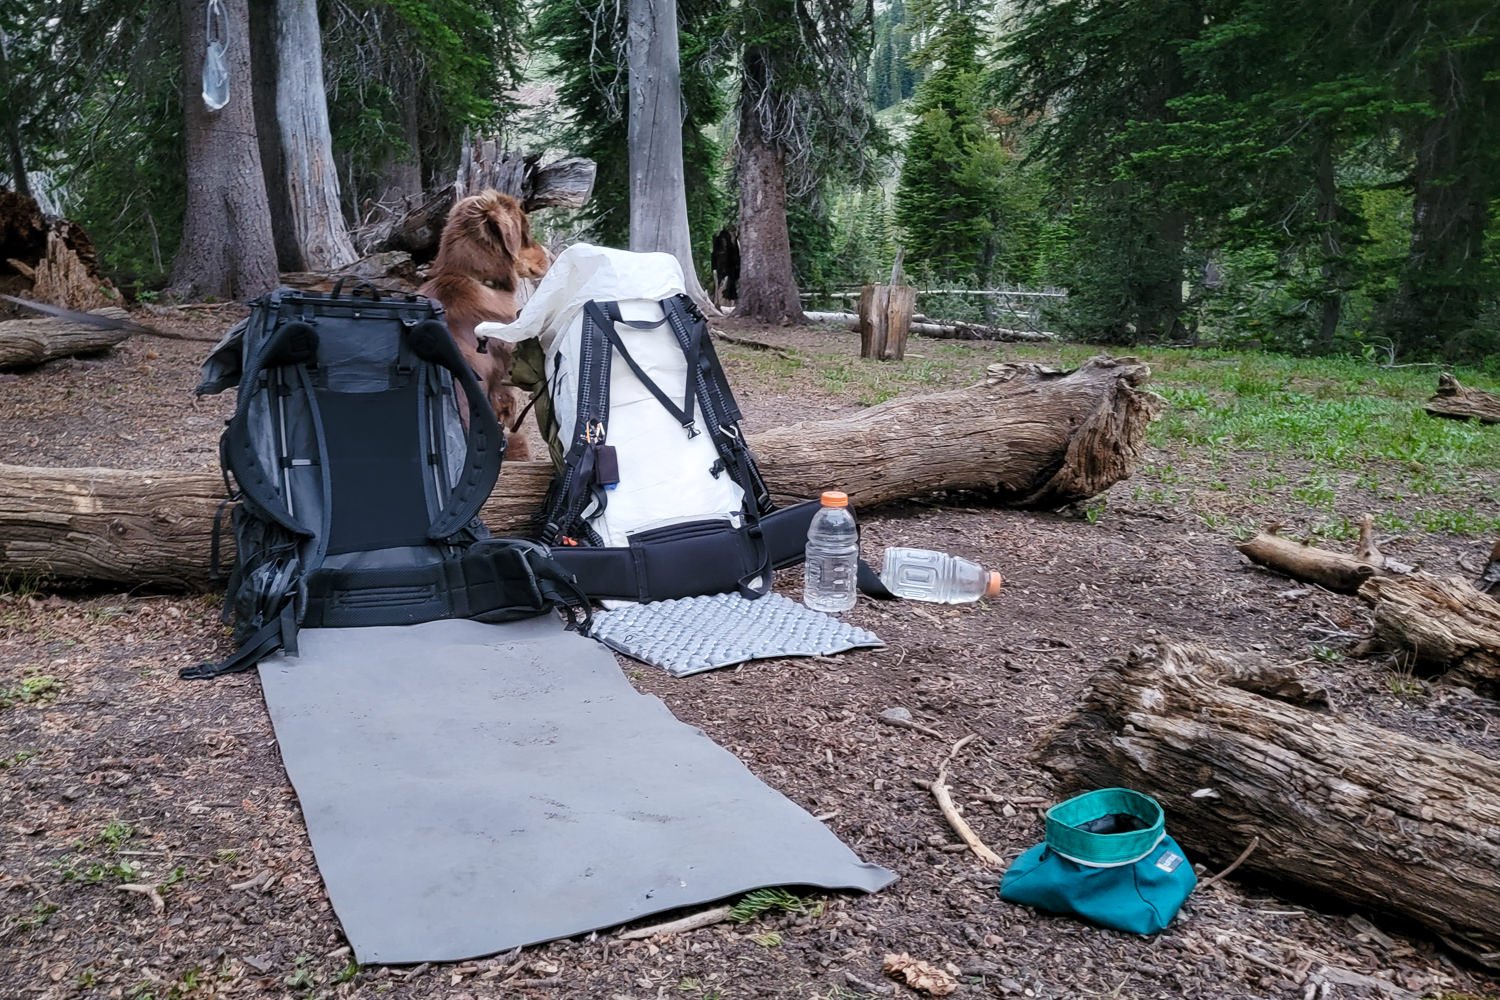 The Gossamer Gear Thinlight & Therm-a-Rest Z-Seat leaning against a log on a backpacking trip